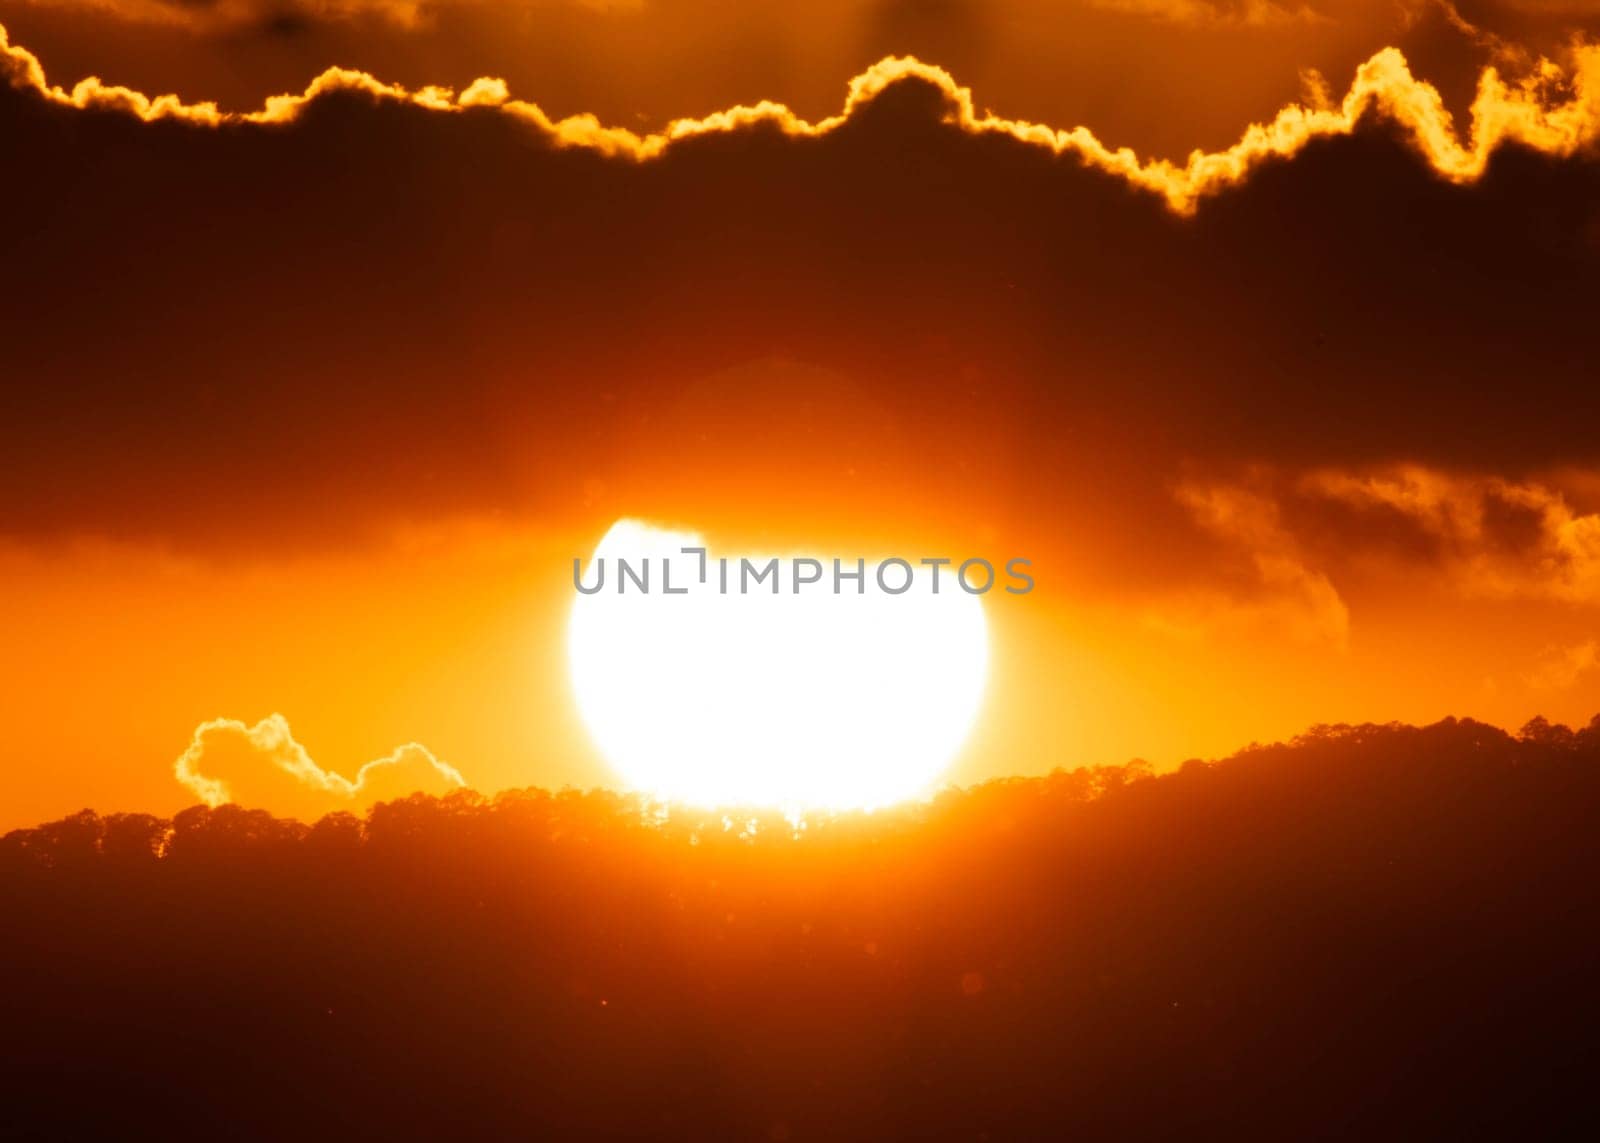 Beautiful nature sky with orange, yellow sunshine and fluffy clouds. Time lapse of a beautiful dramatic sky with a big sun at sunset or sunrise.